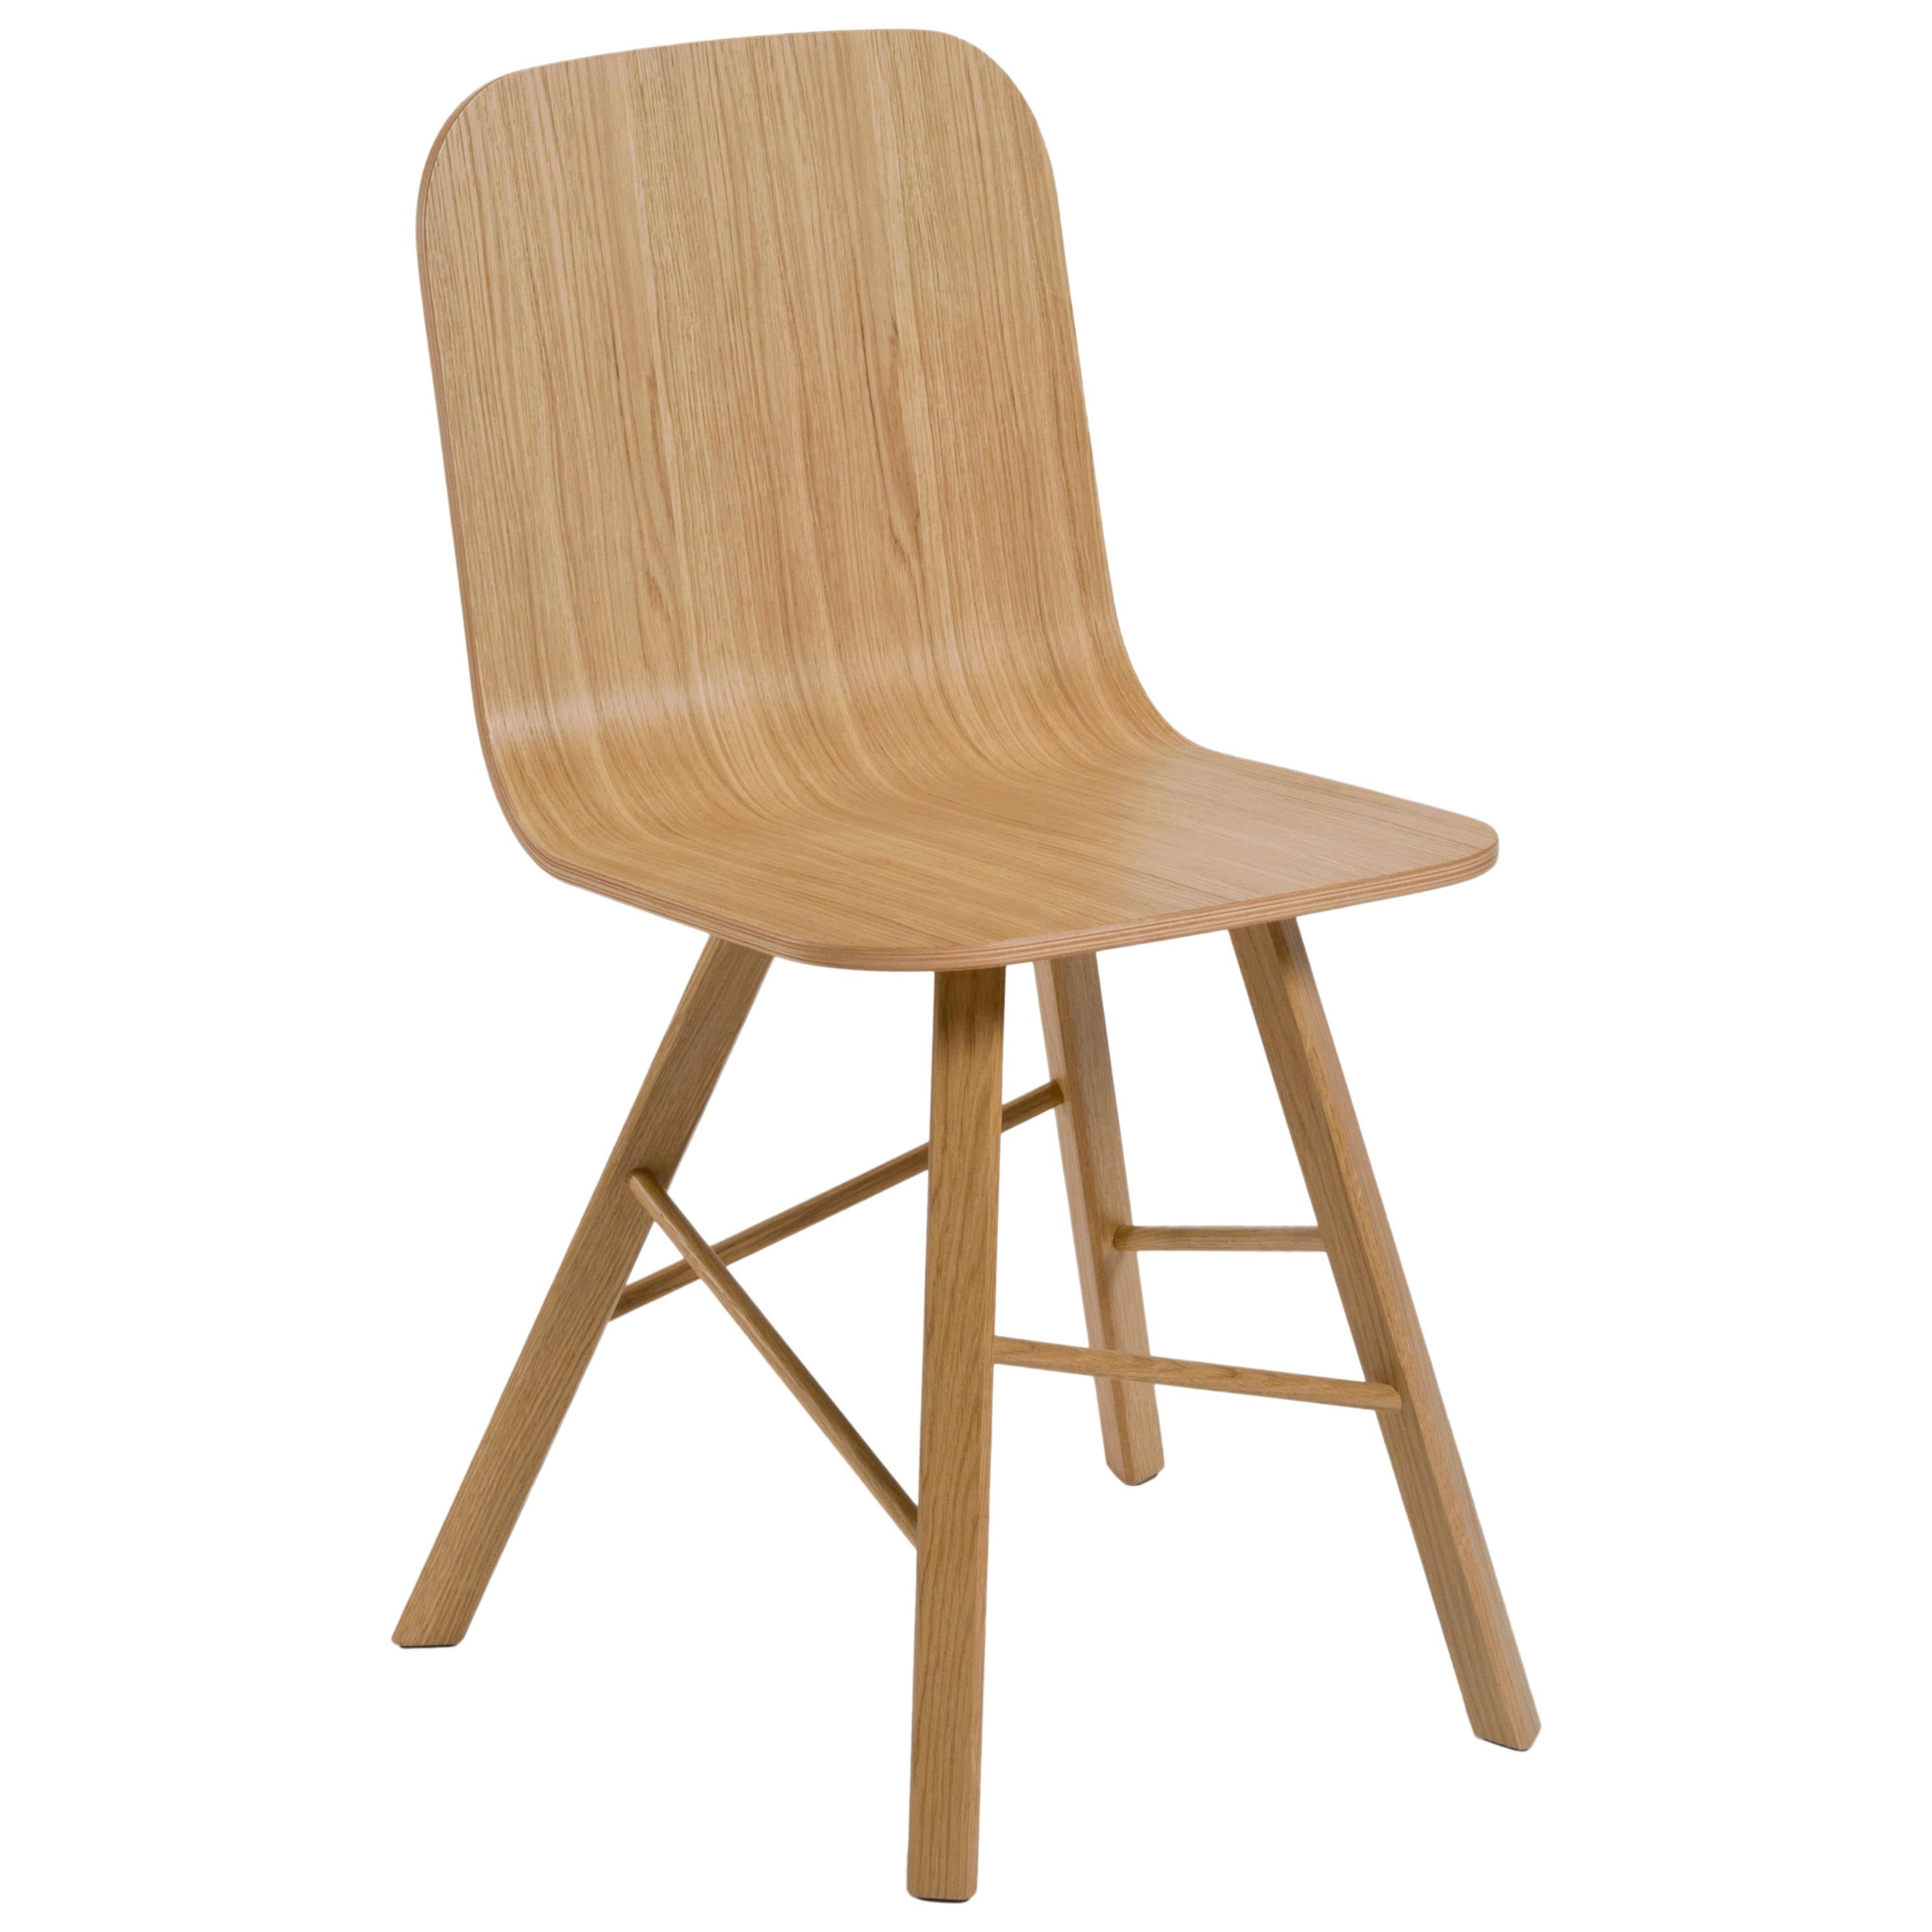 Machine-Made Tria Simple Chair Oak and Orange Upholstered Seat by Colé, Minimalist For Sale